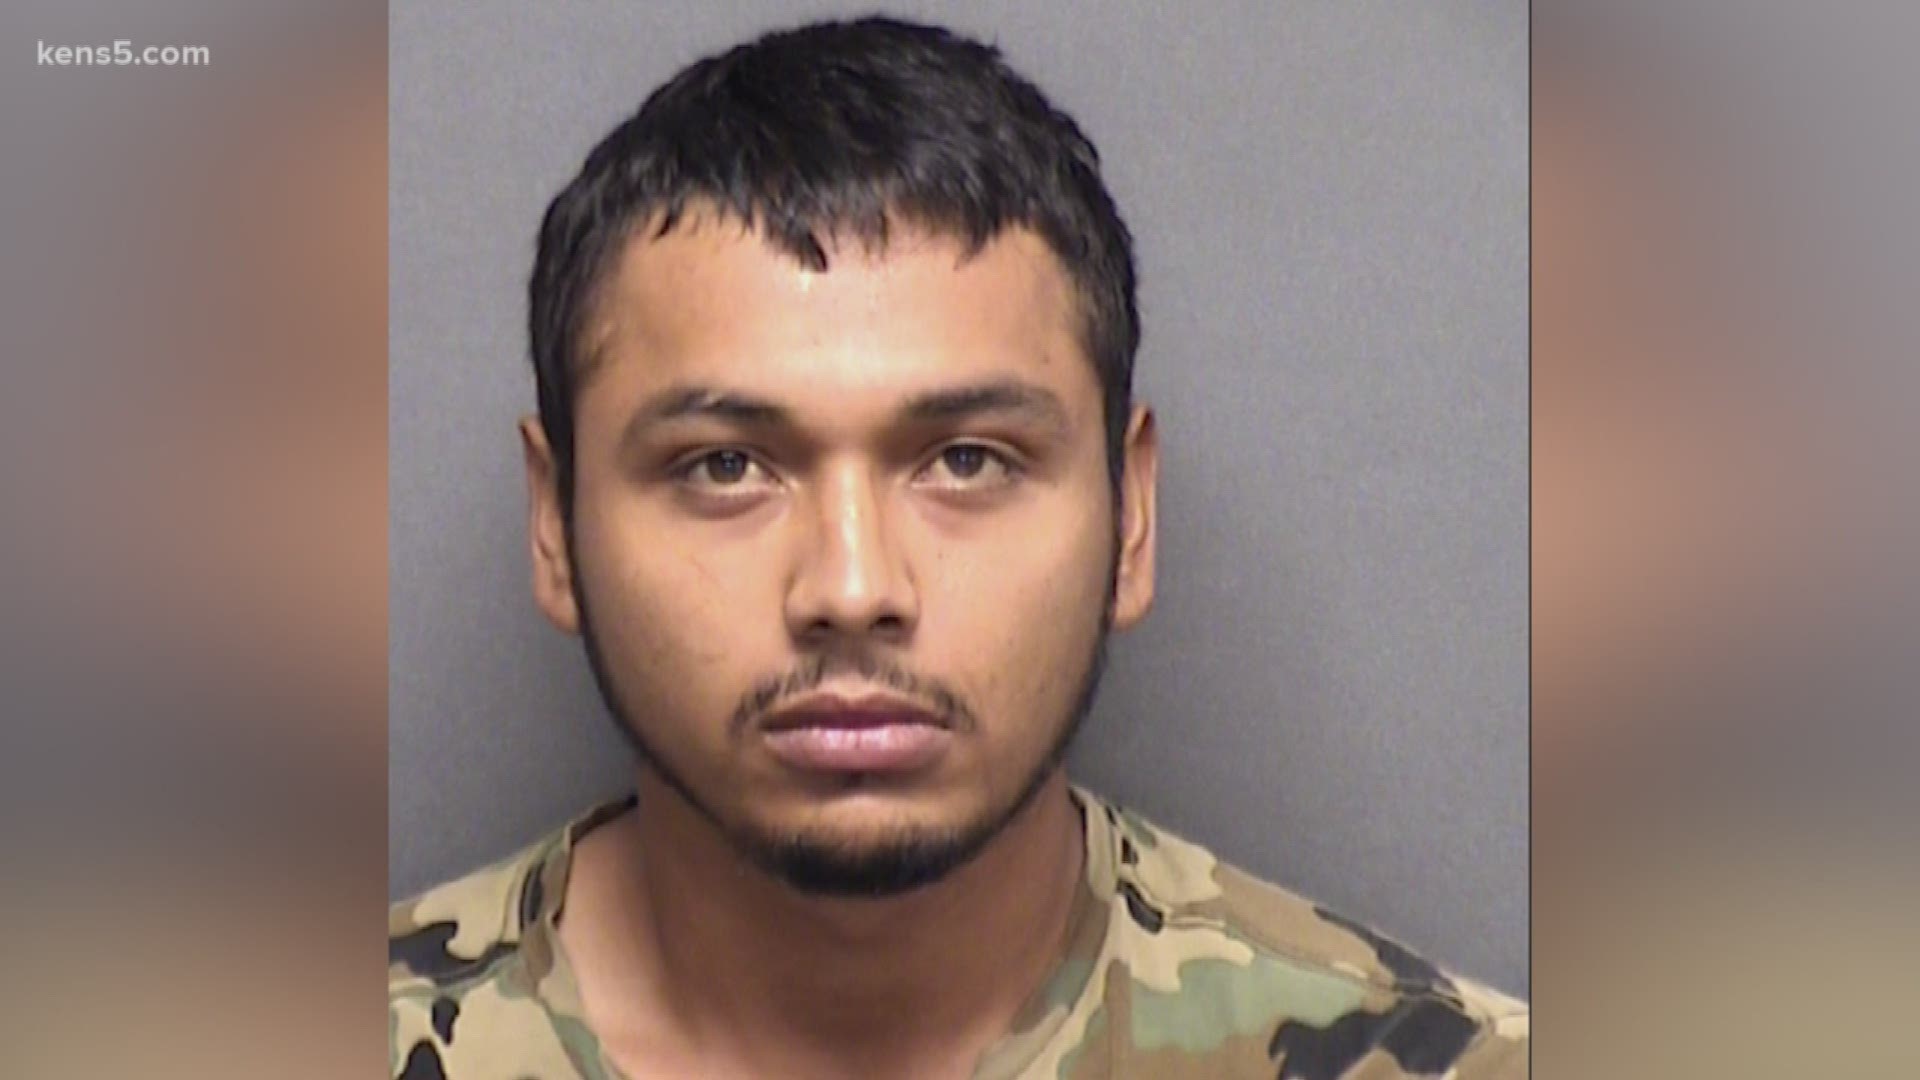 Police say Jose Menjiavar grabbed a former girlfriend by her ponytail and dragged her down the street with his car.